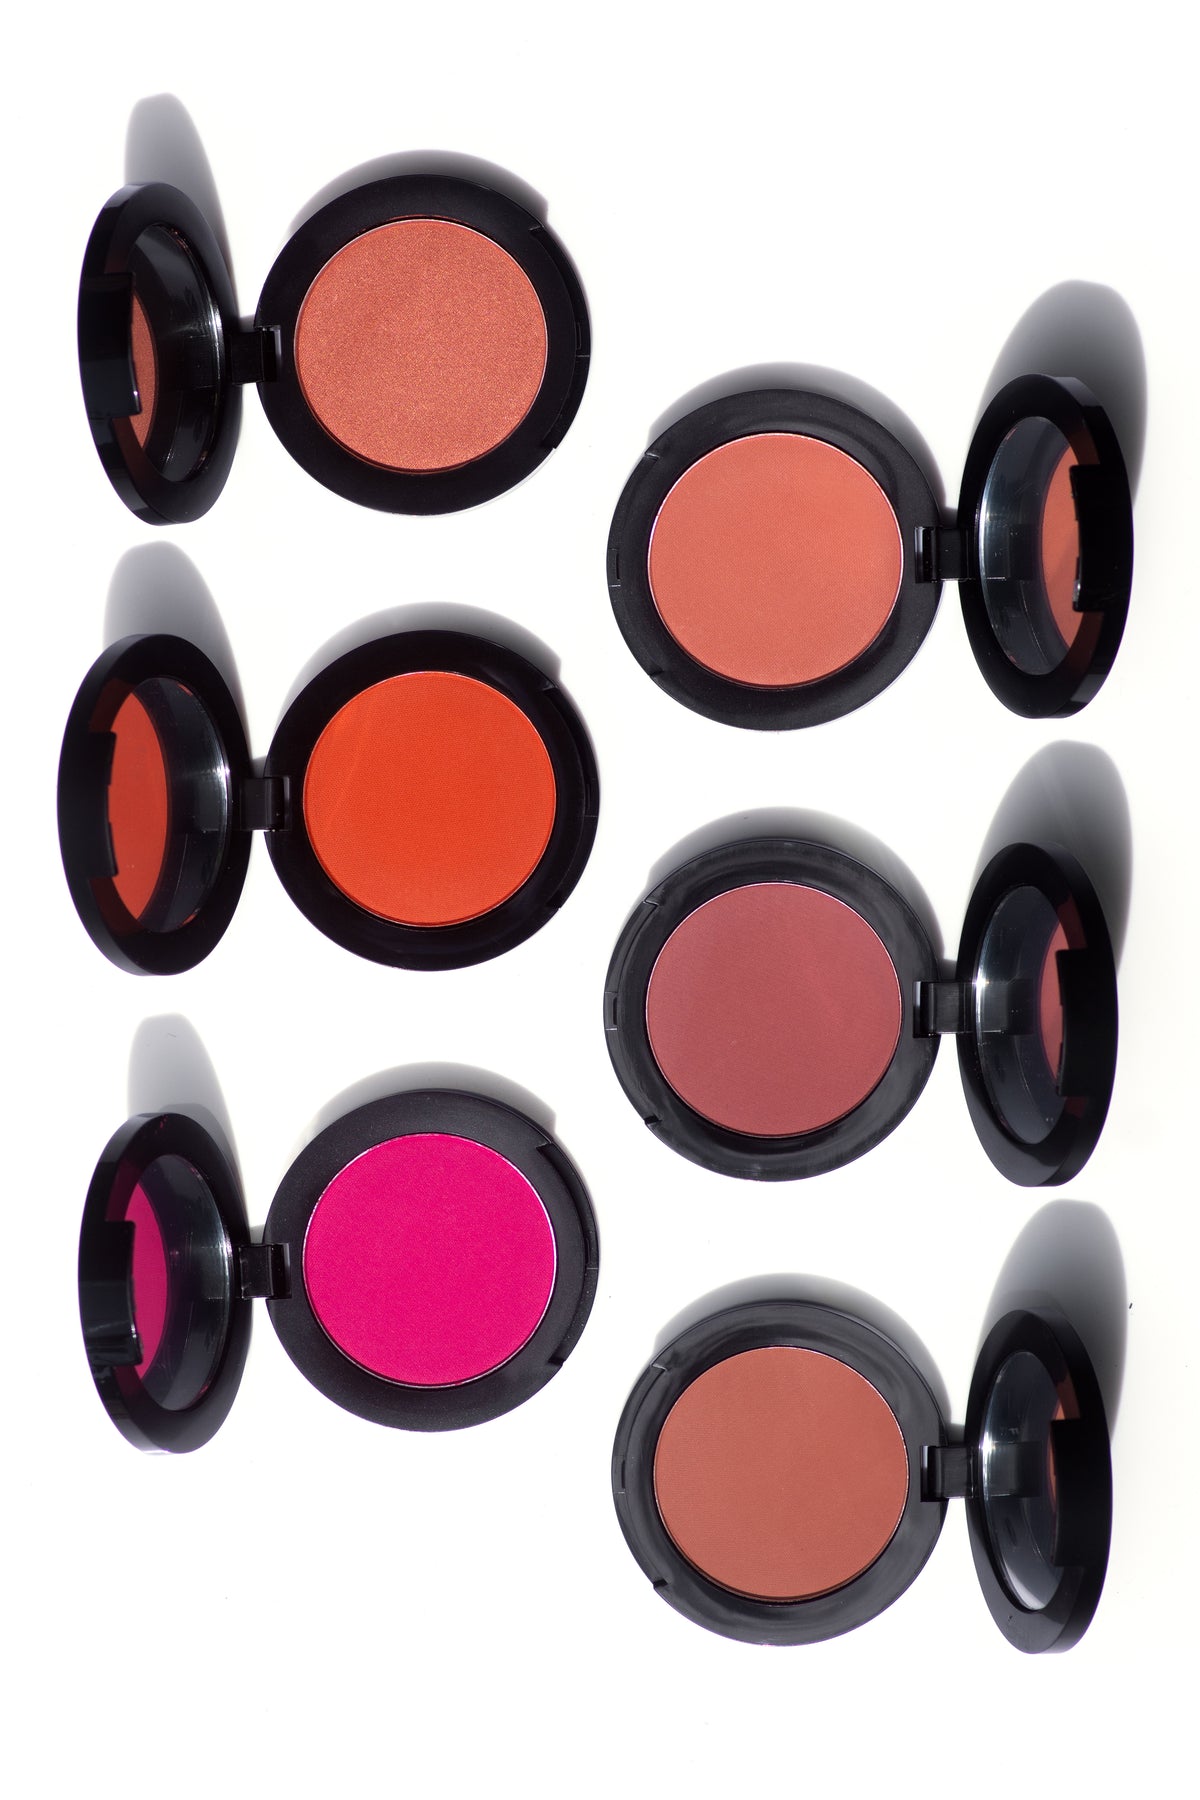 Our Darling Floriography Blush